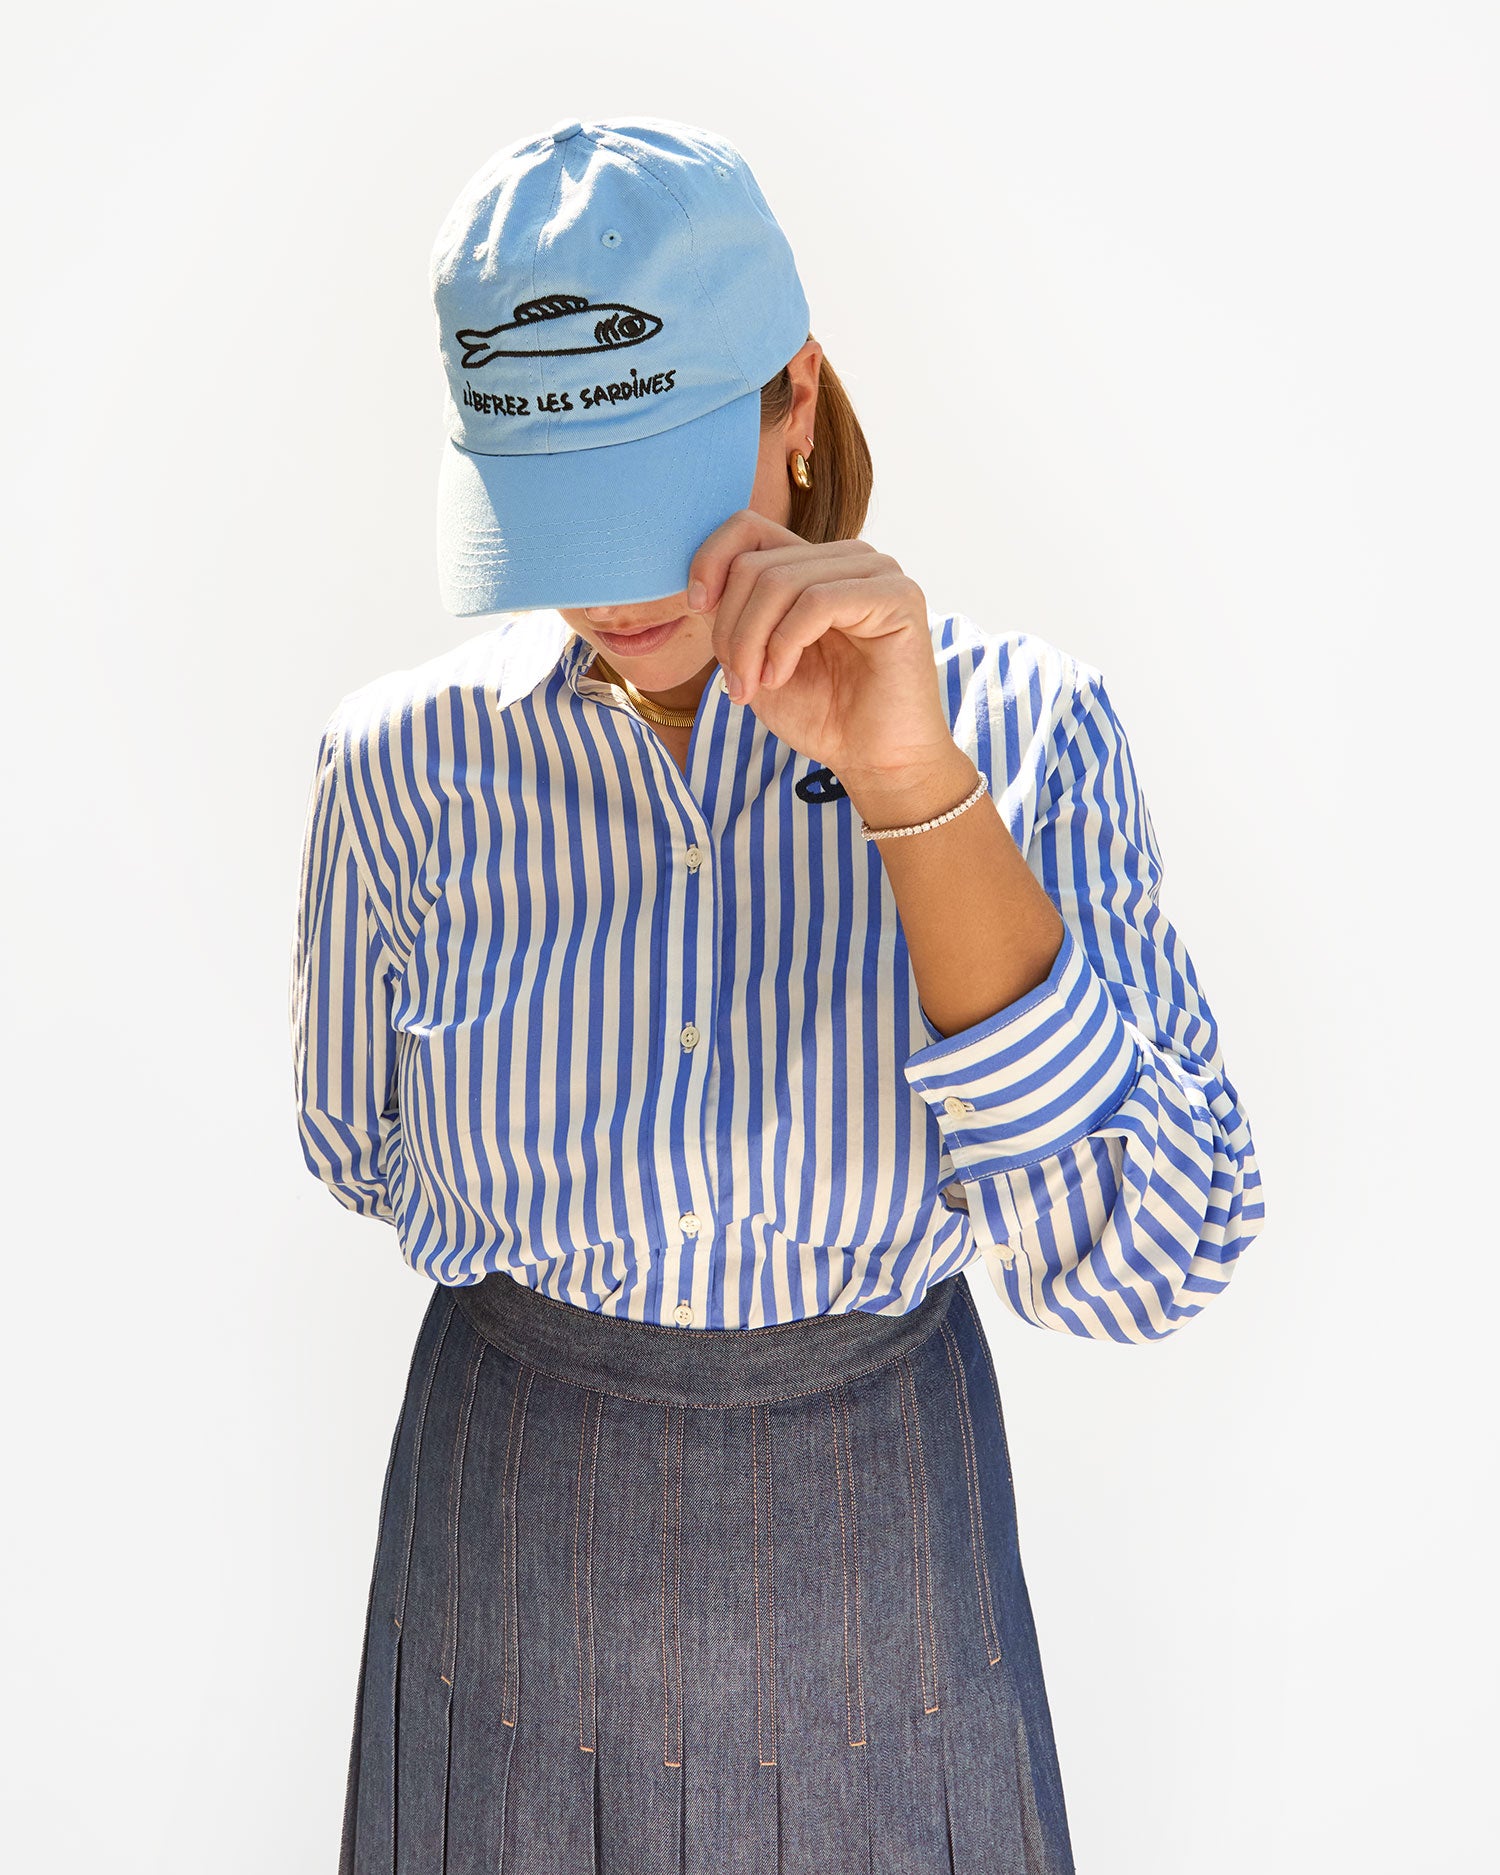 Sonnie wearing the Sky Blue Liberez Les Sardines Baseball Hat with a striped shirt and a pleated skirt